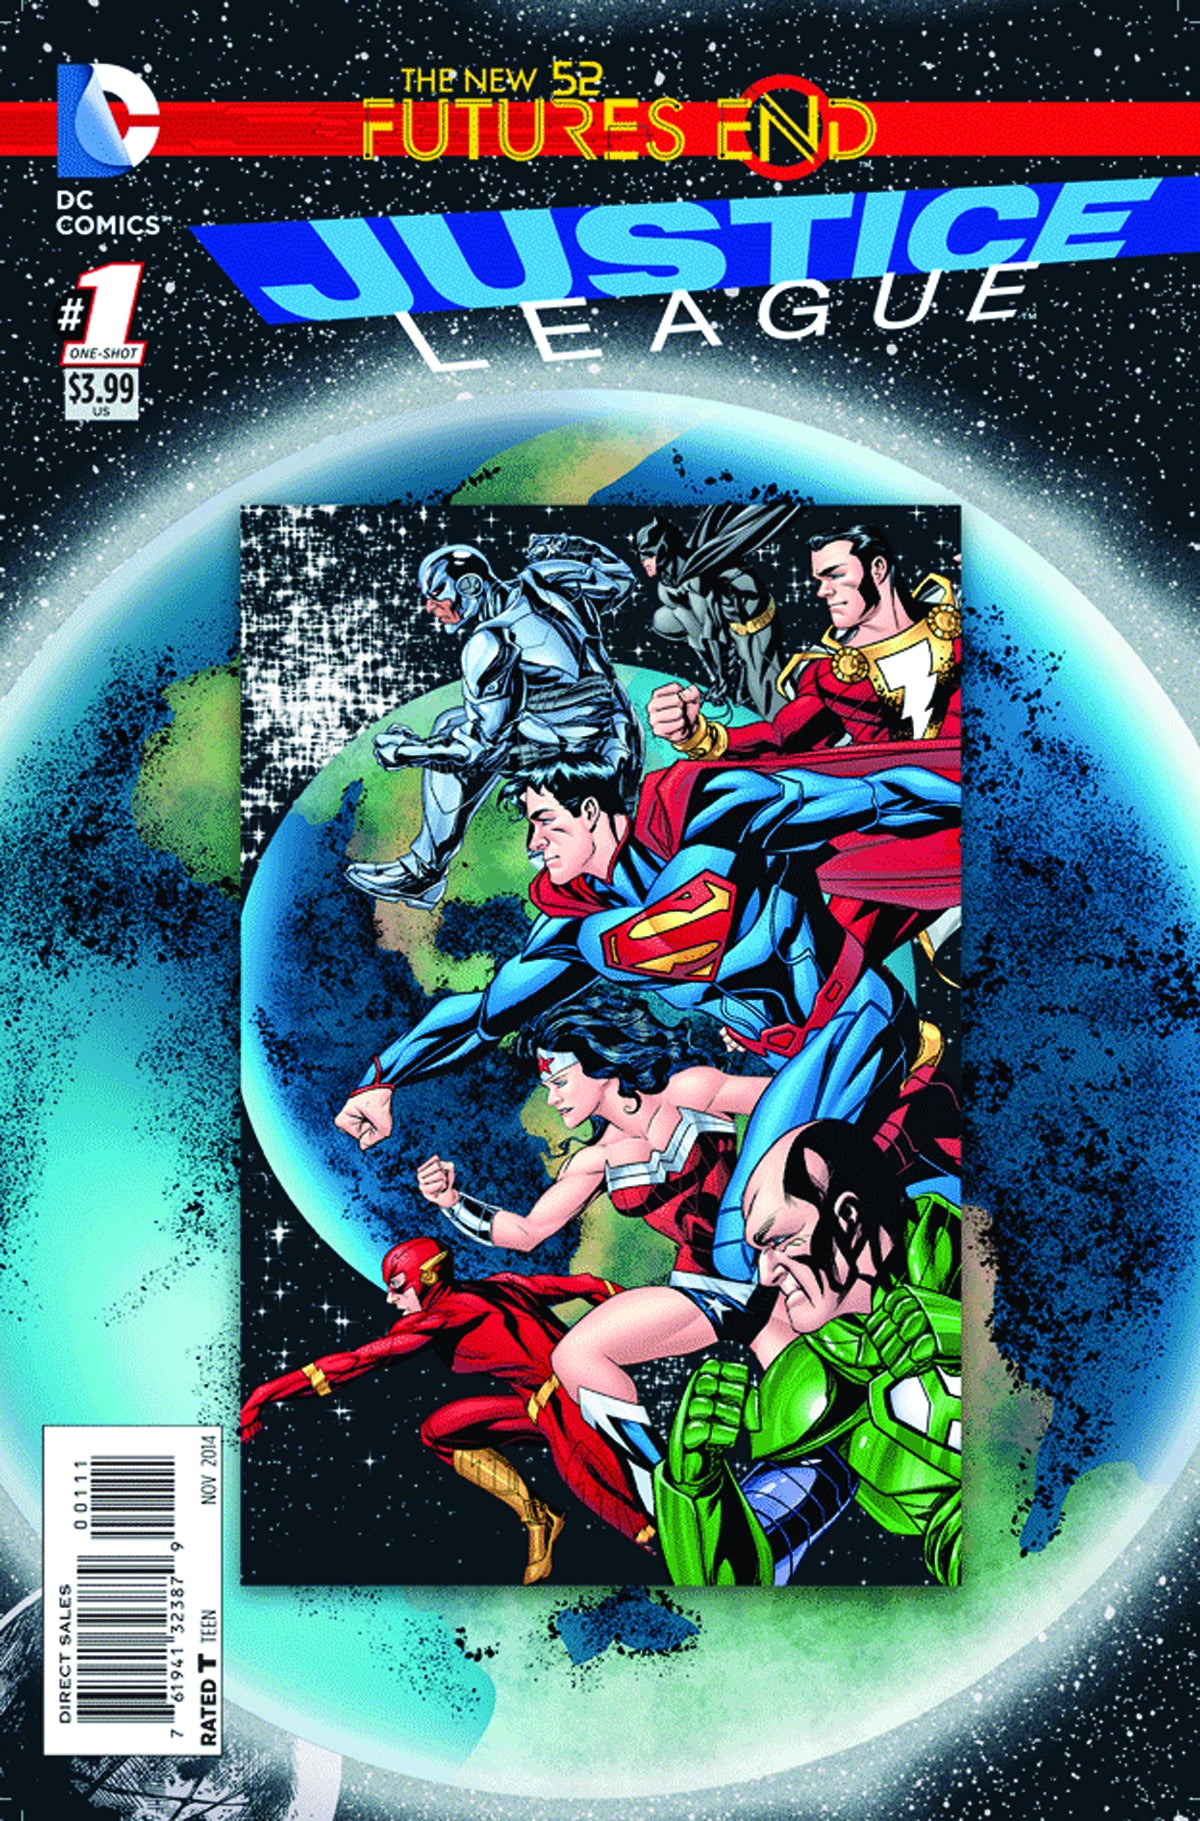 JUSTICE LEAGUE FUTURES END #1 | Game Master's Emporium (The New GME)